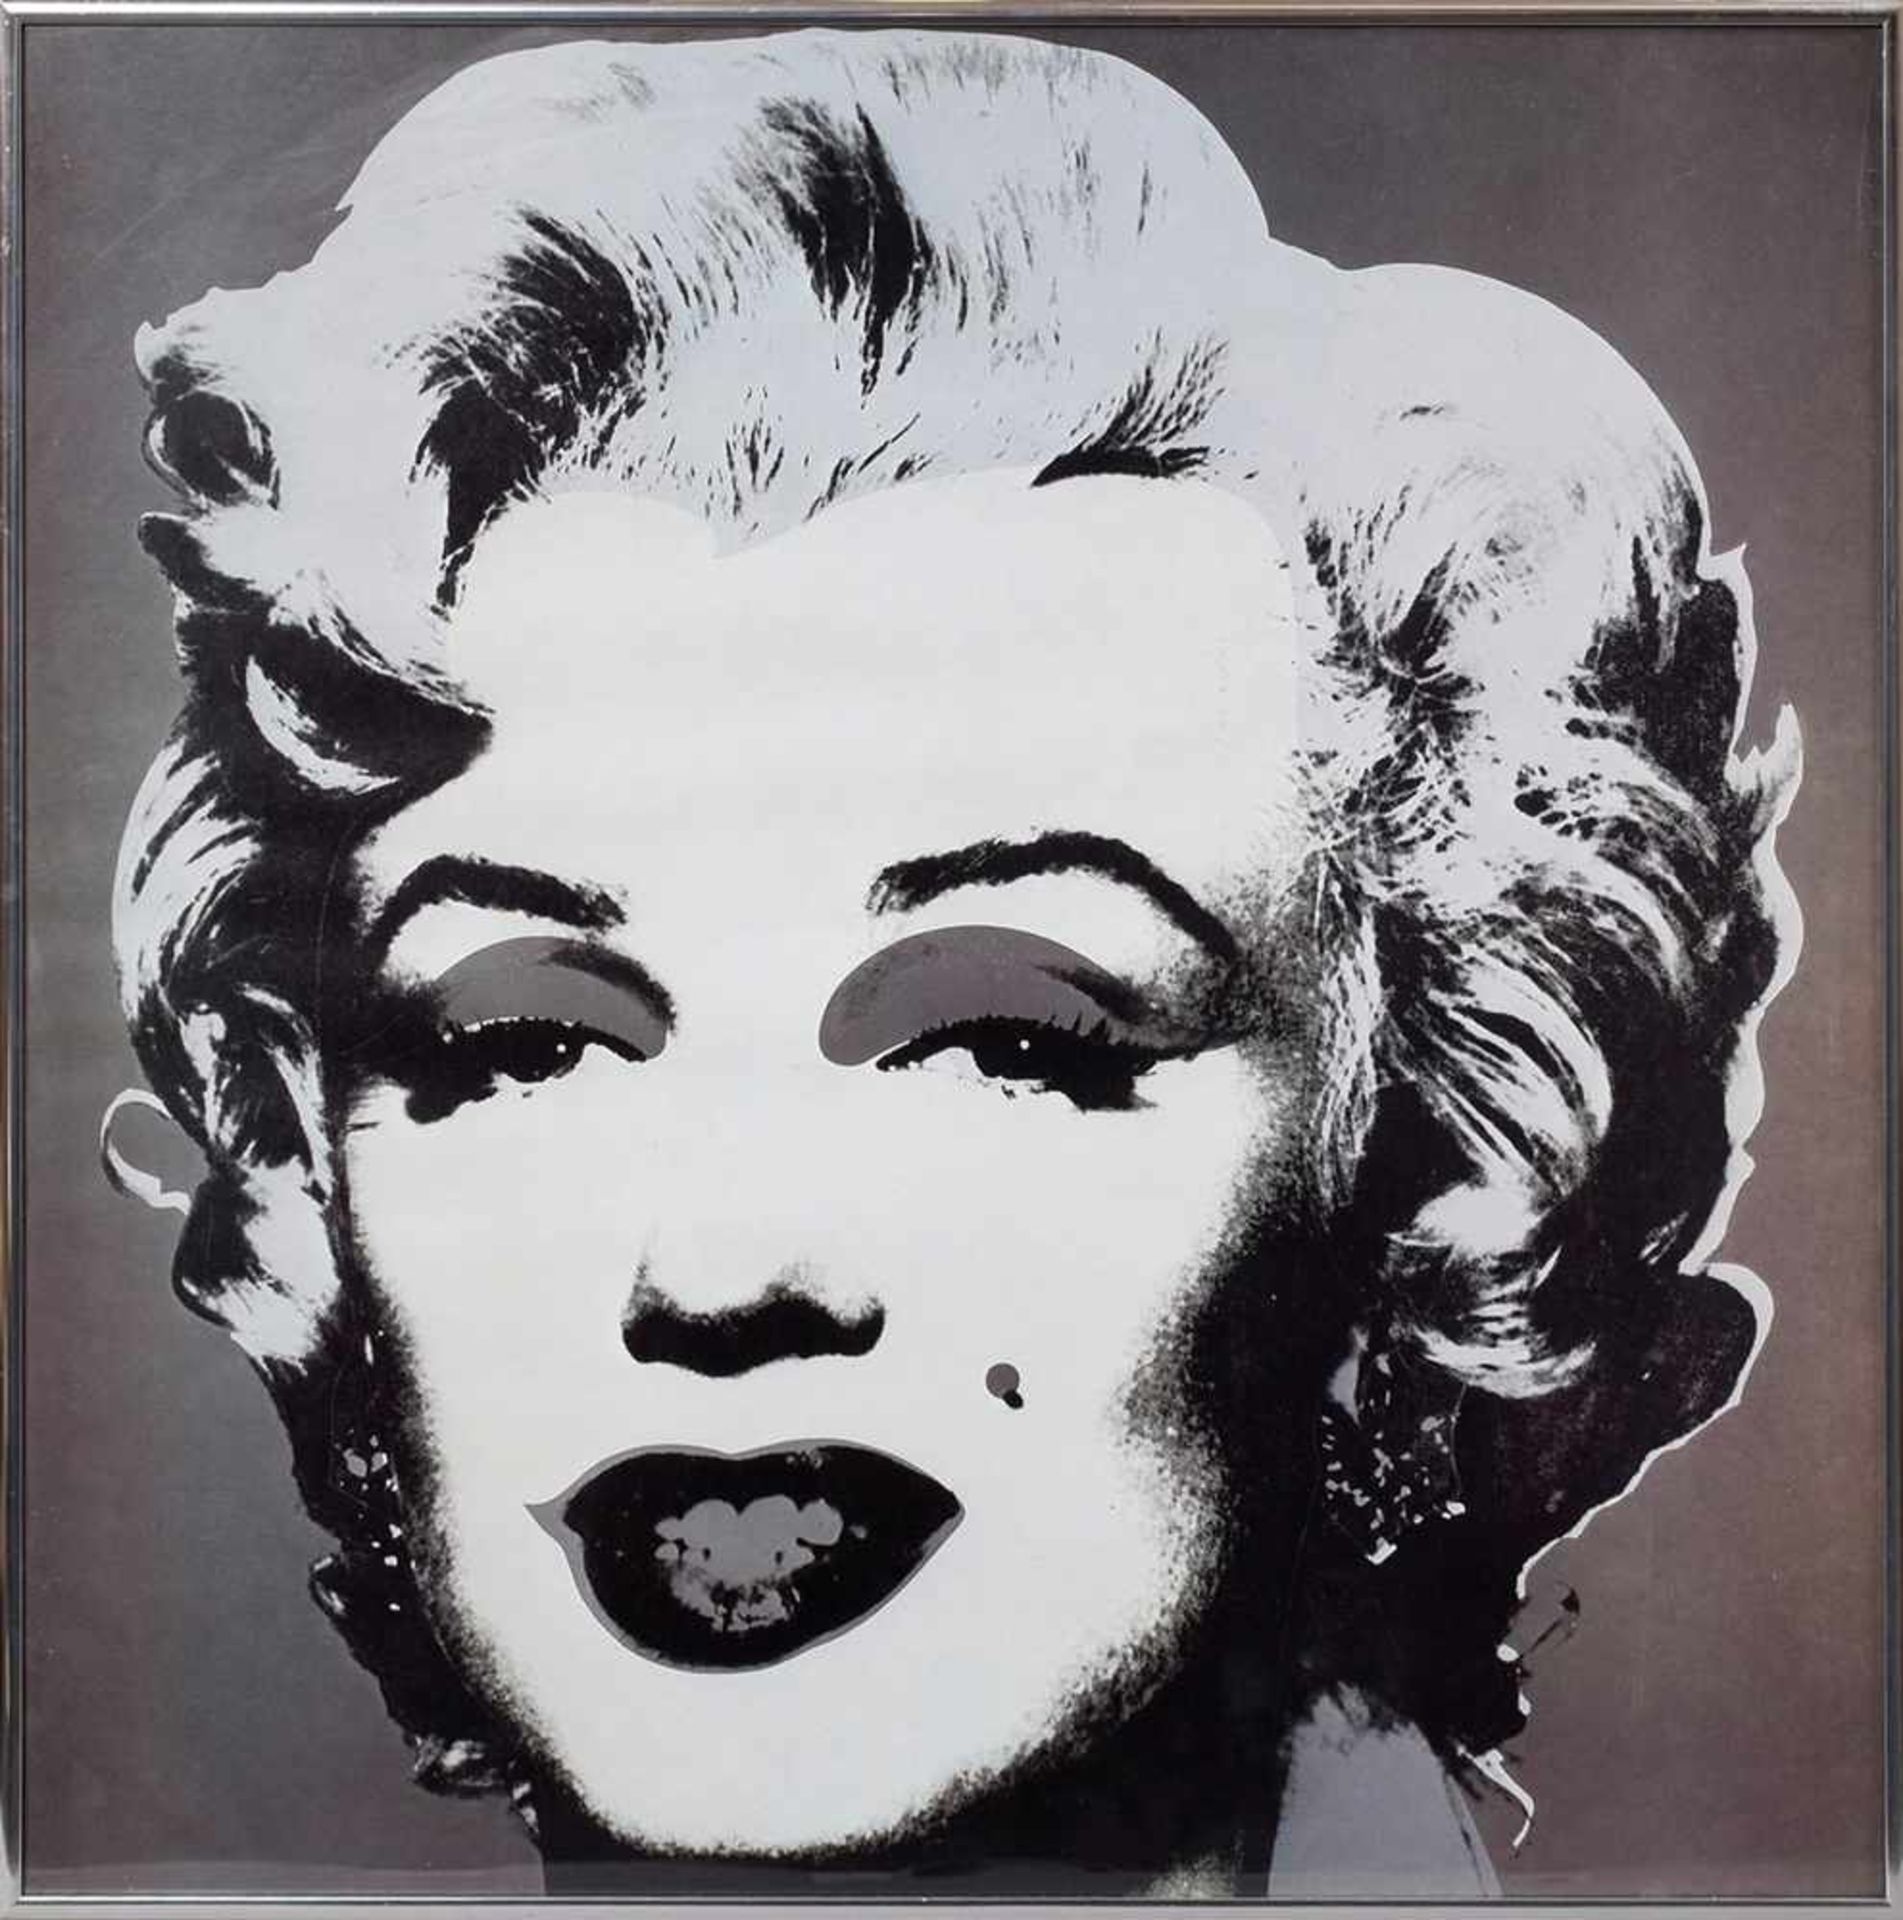 2 Diverse Warhol, Andy (1928-1987) "Turquoise Marilyn" Offsetlithographie Poster der Tate Gallery - Bild 3 aus 5